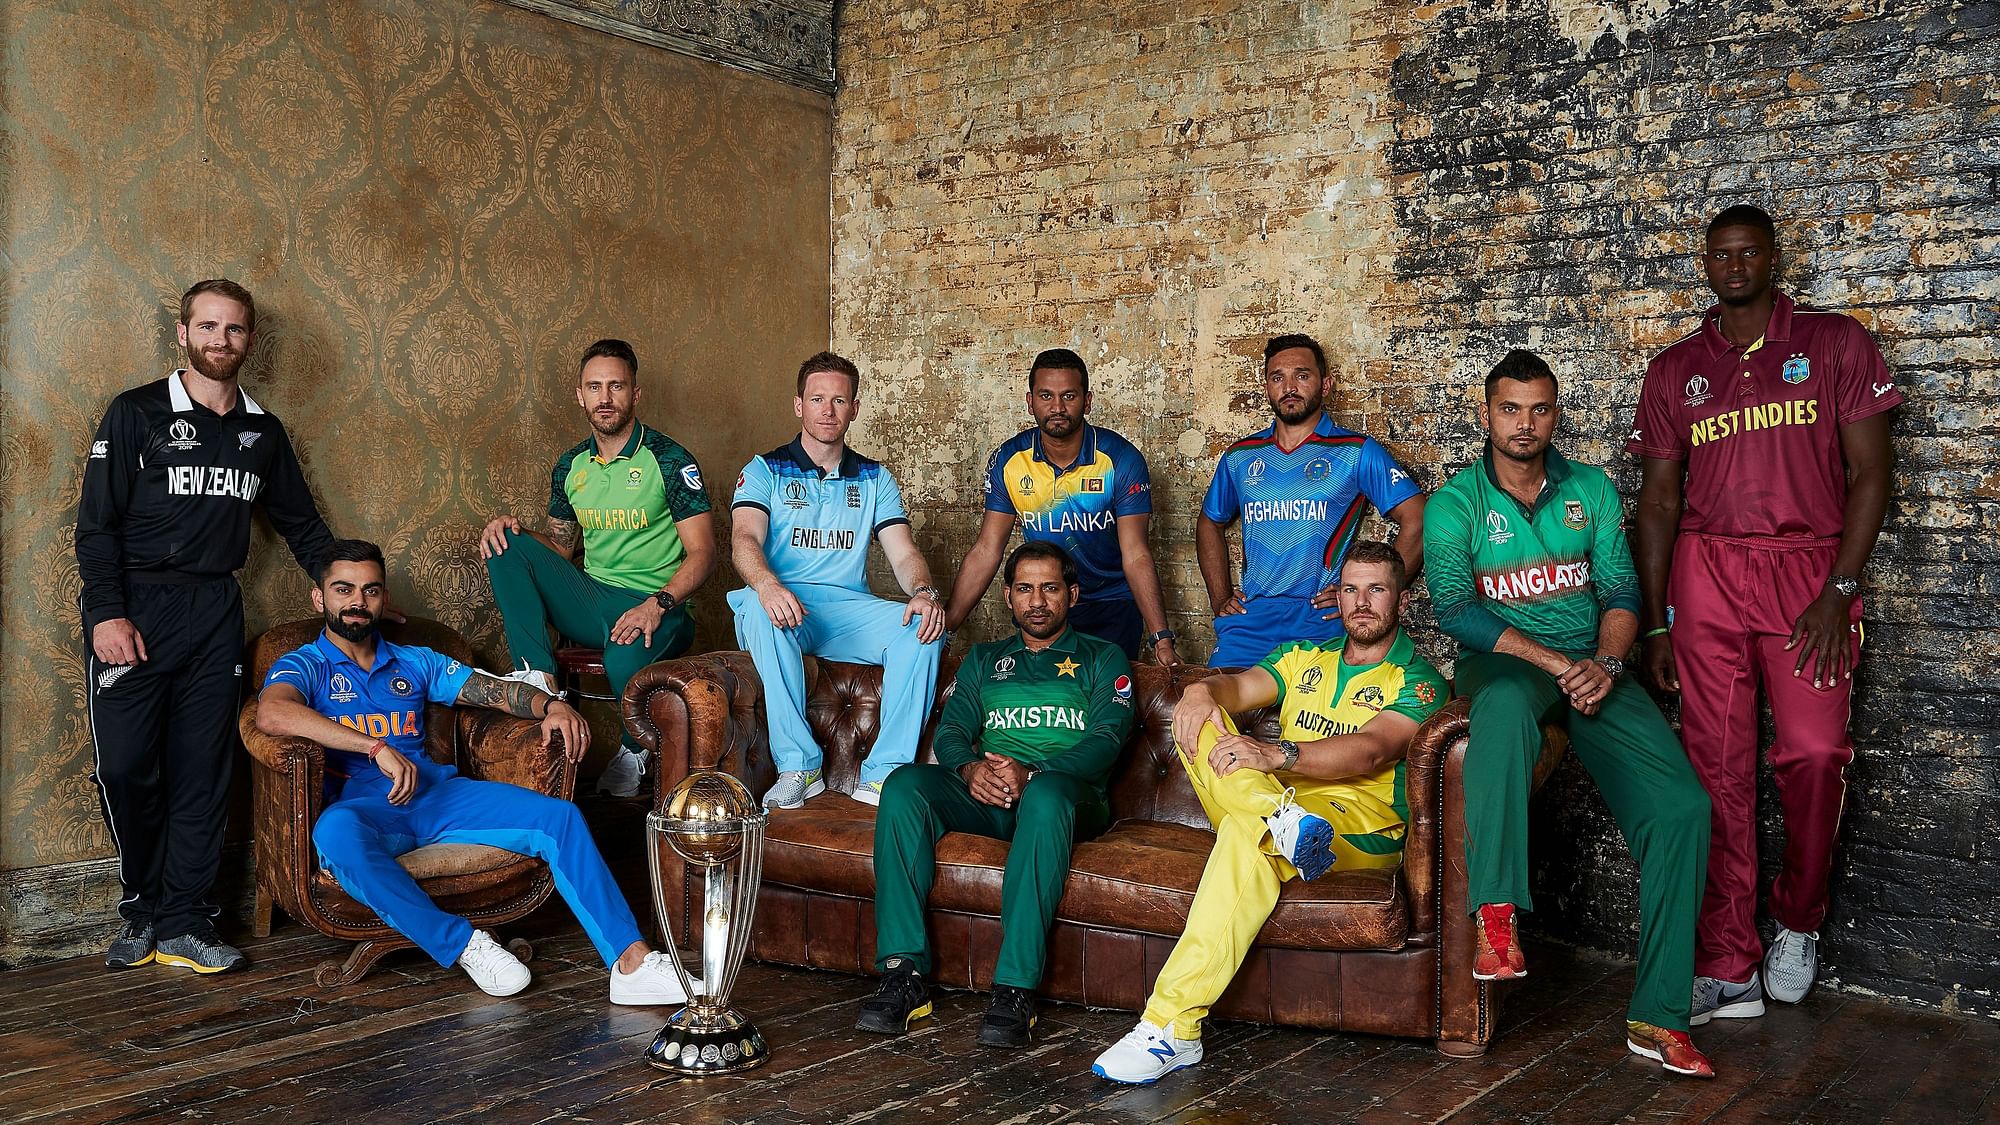 The 10 captains of the 2019 ICC World Cup pose for a picture after the first official joint press conference on 23 May, 2019.